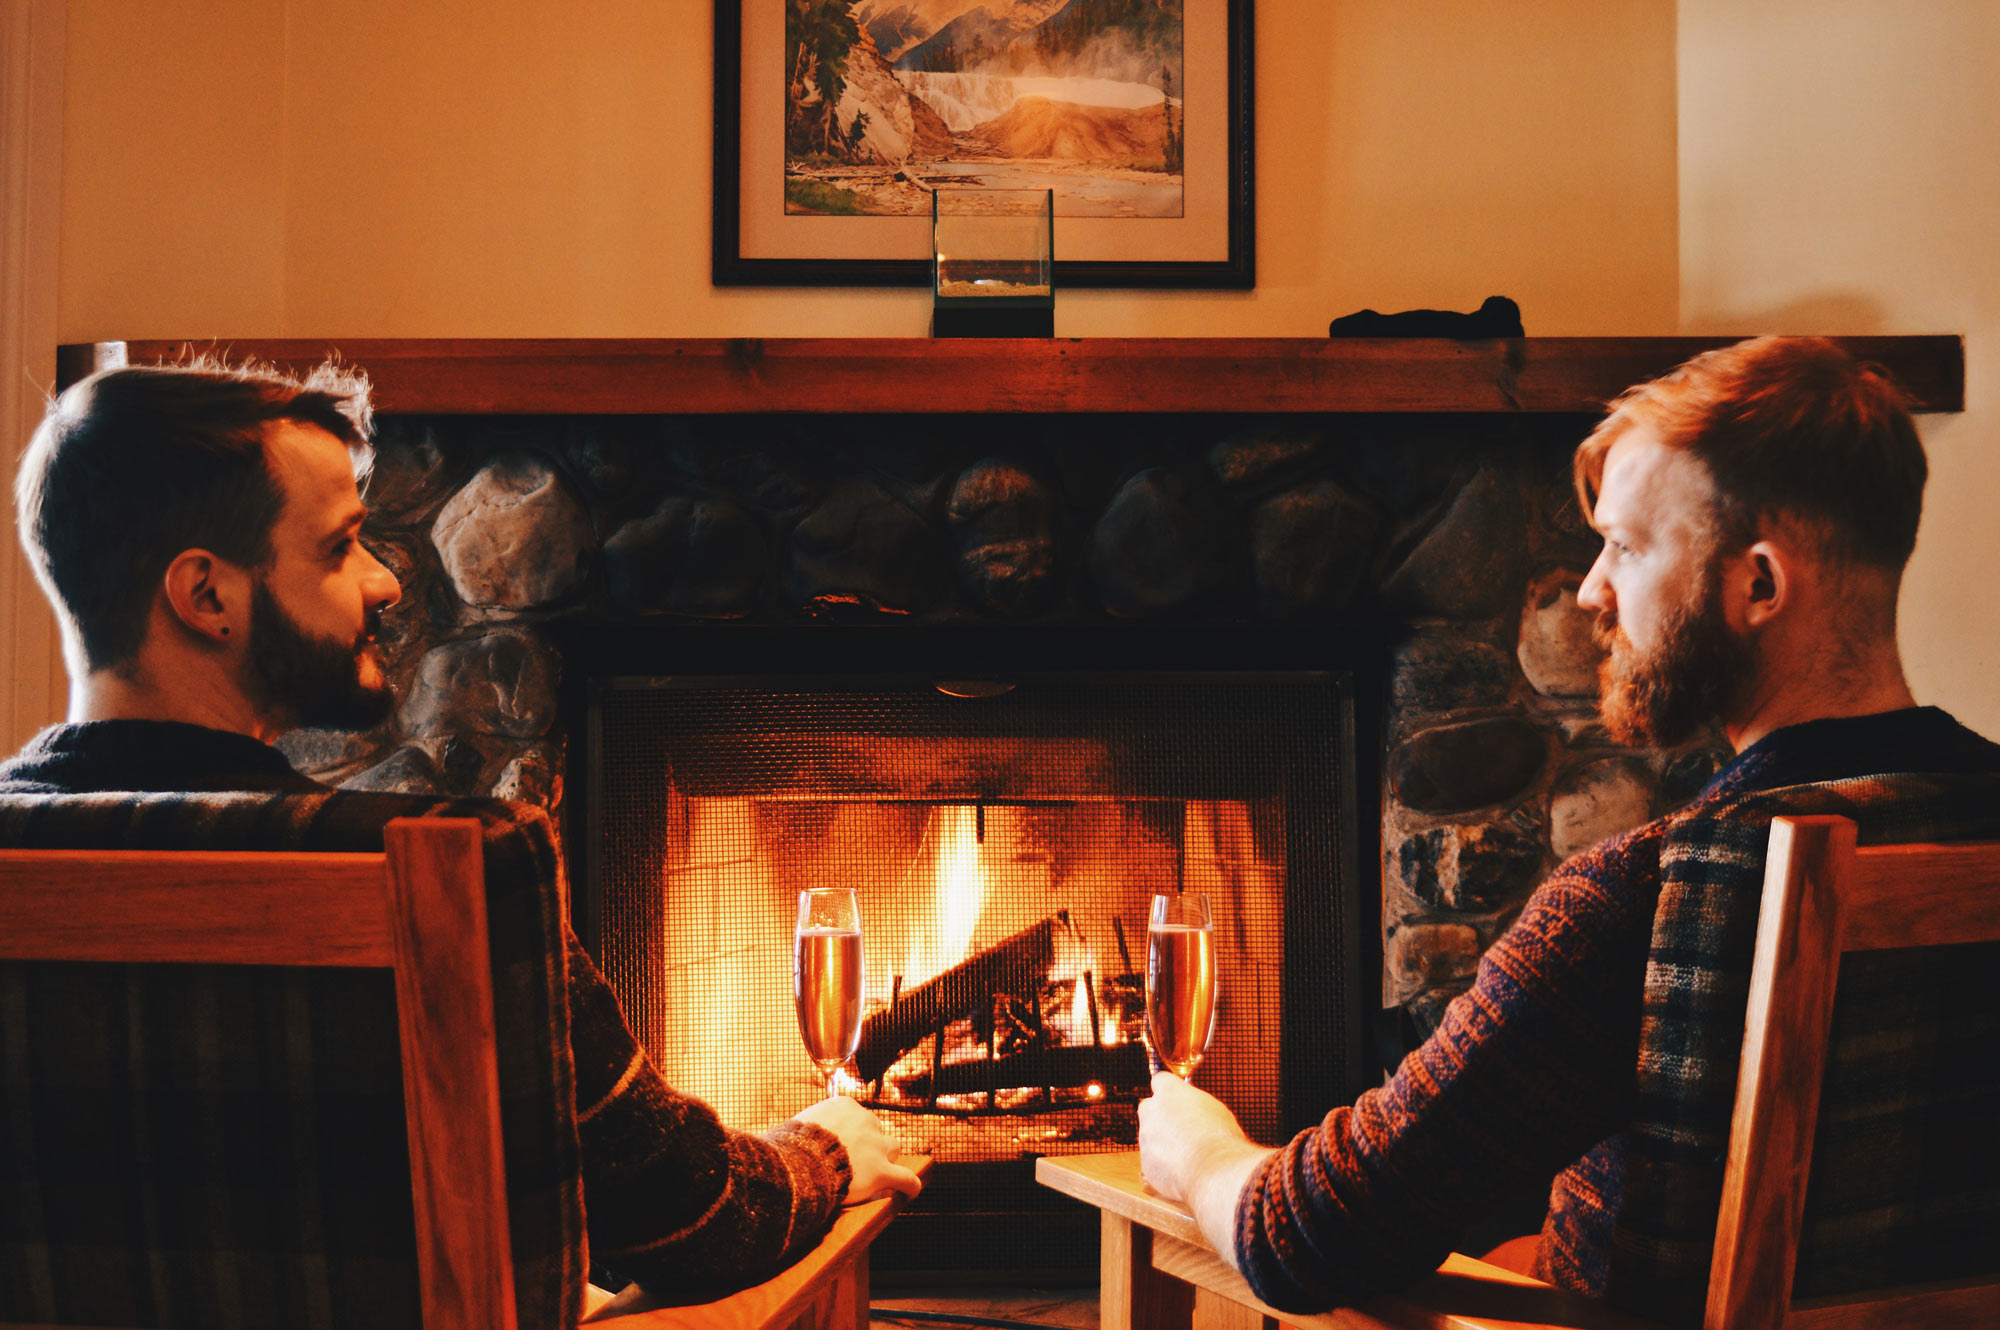 Relaxing in front of the open fireplace in our room | Emerald Lake Lodge gay-friendly accommodation © Coupleofmen.com